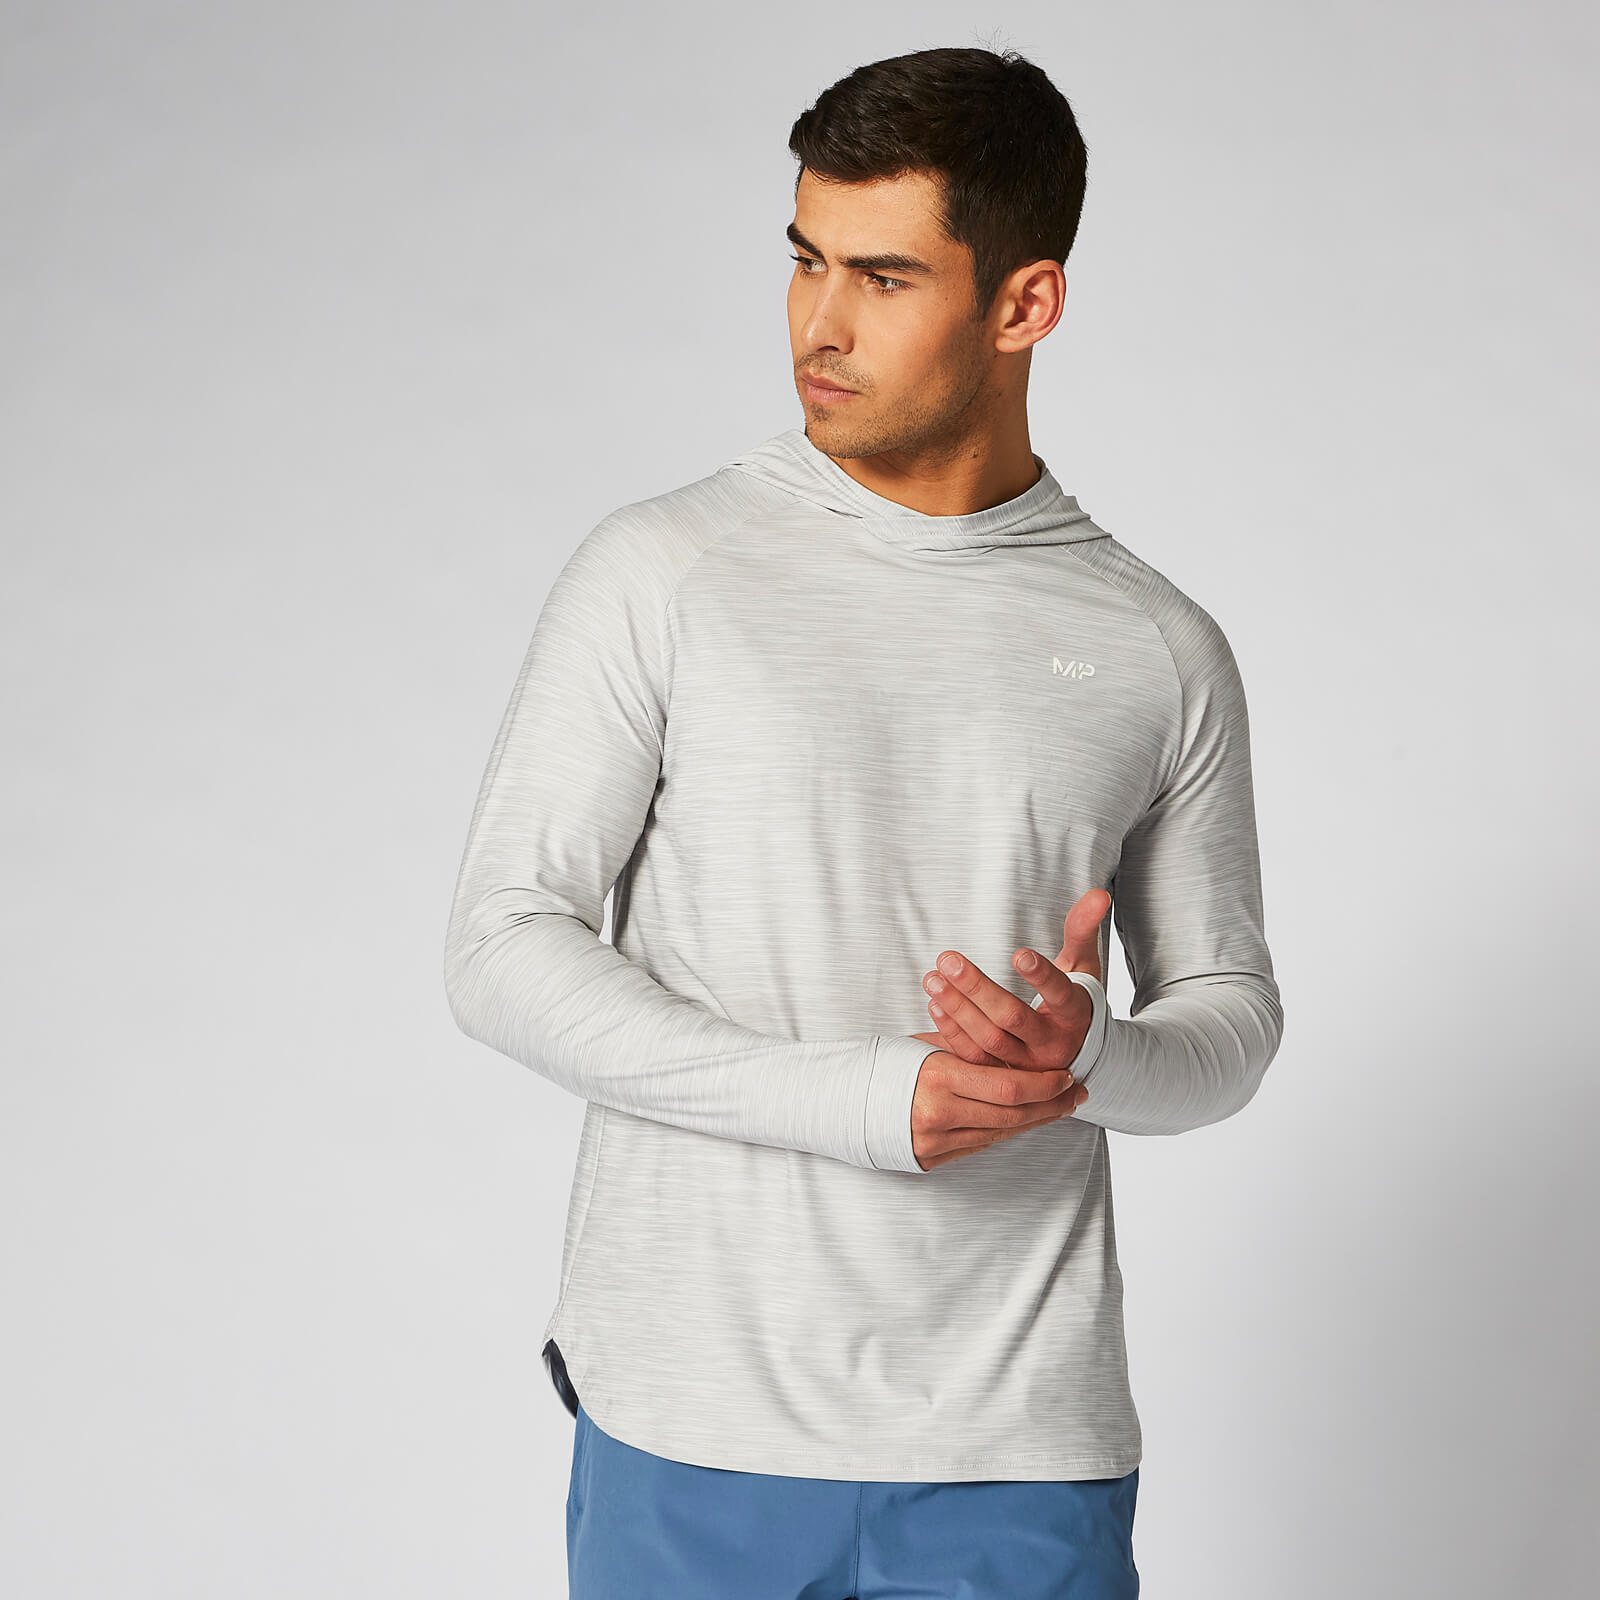 Myprotein Dry Tech Infinity Hoodie - Silver